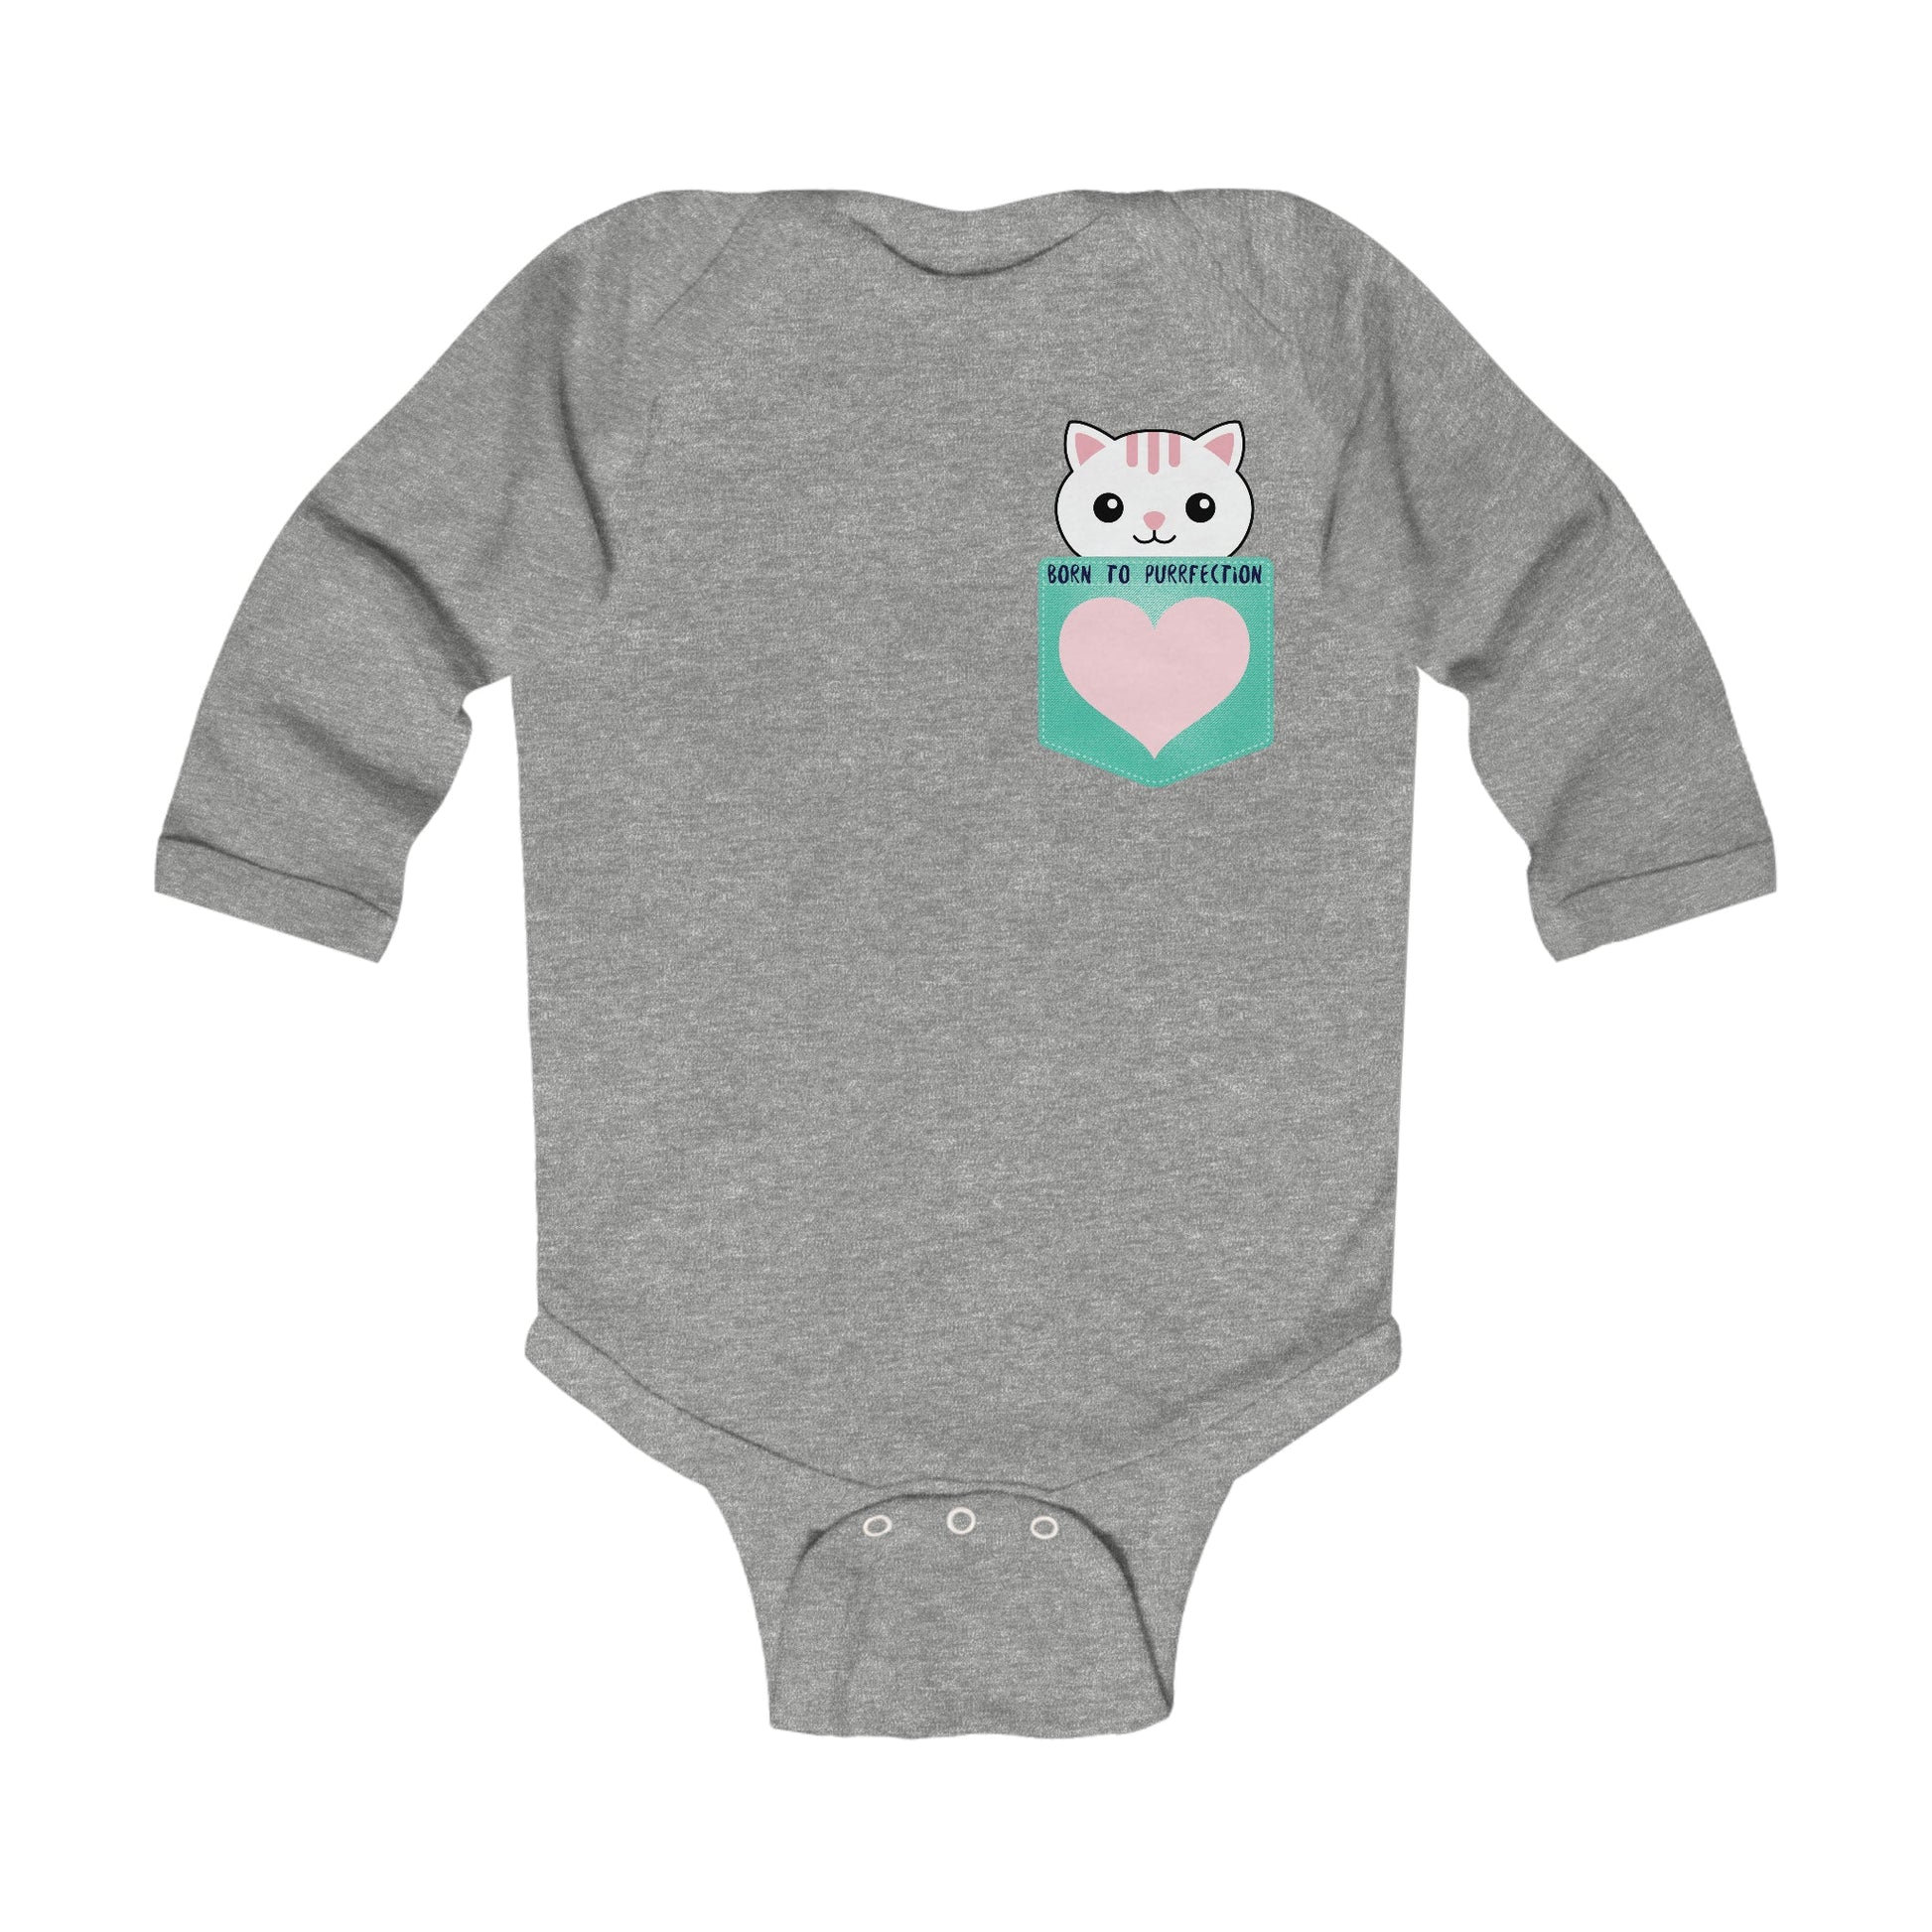 Adorable Kitty Baby Onesie Cute Cat Print Infant Romper, Cute Baby Onesie: The Perfect Gift for Baby Showers and Birthdays Catvibesbylizanne